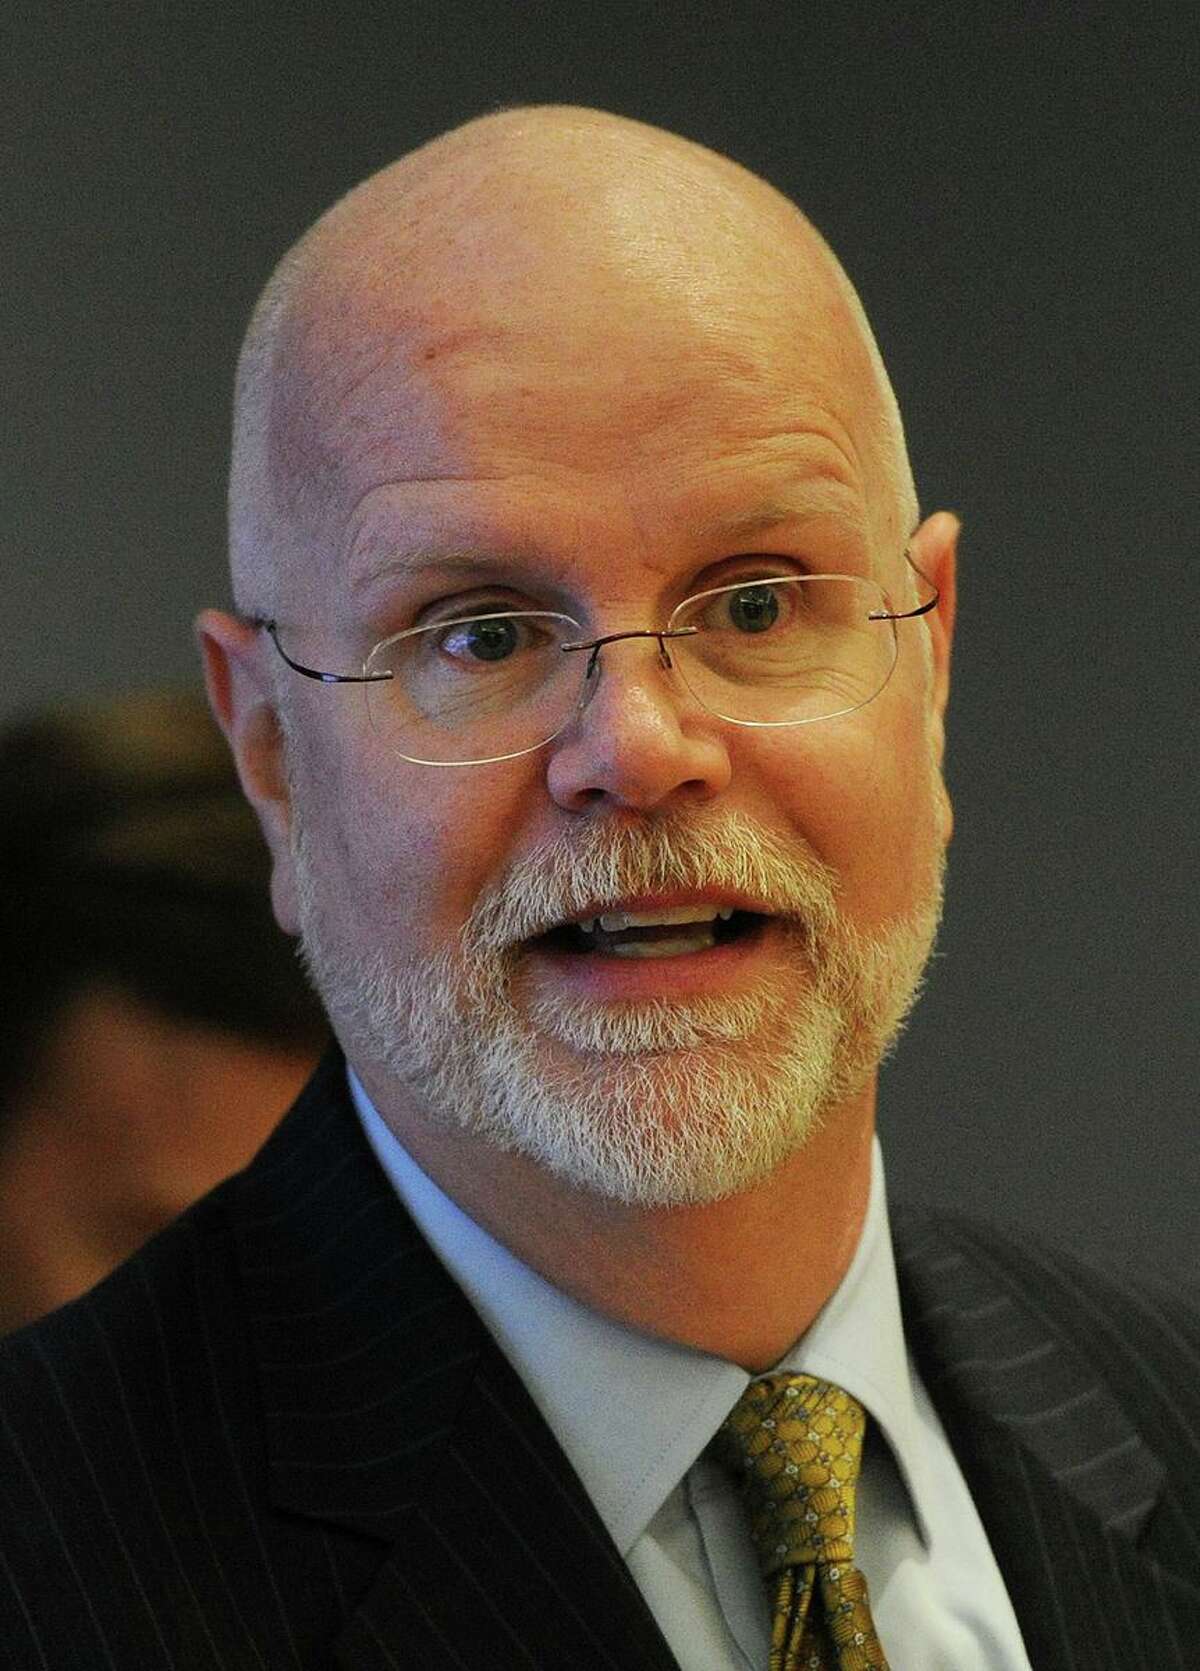 Connecticut State Comptroller Kevin Lembo on Wednesday was tracking down a computer glitch that led to triple payments for an unspecified number of employees.